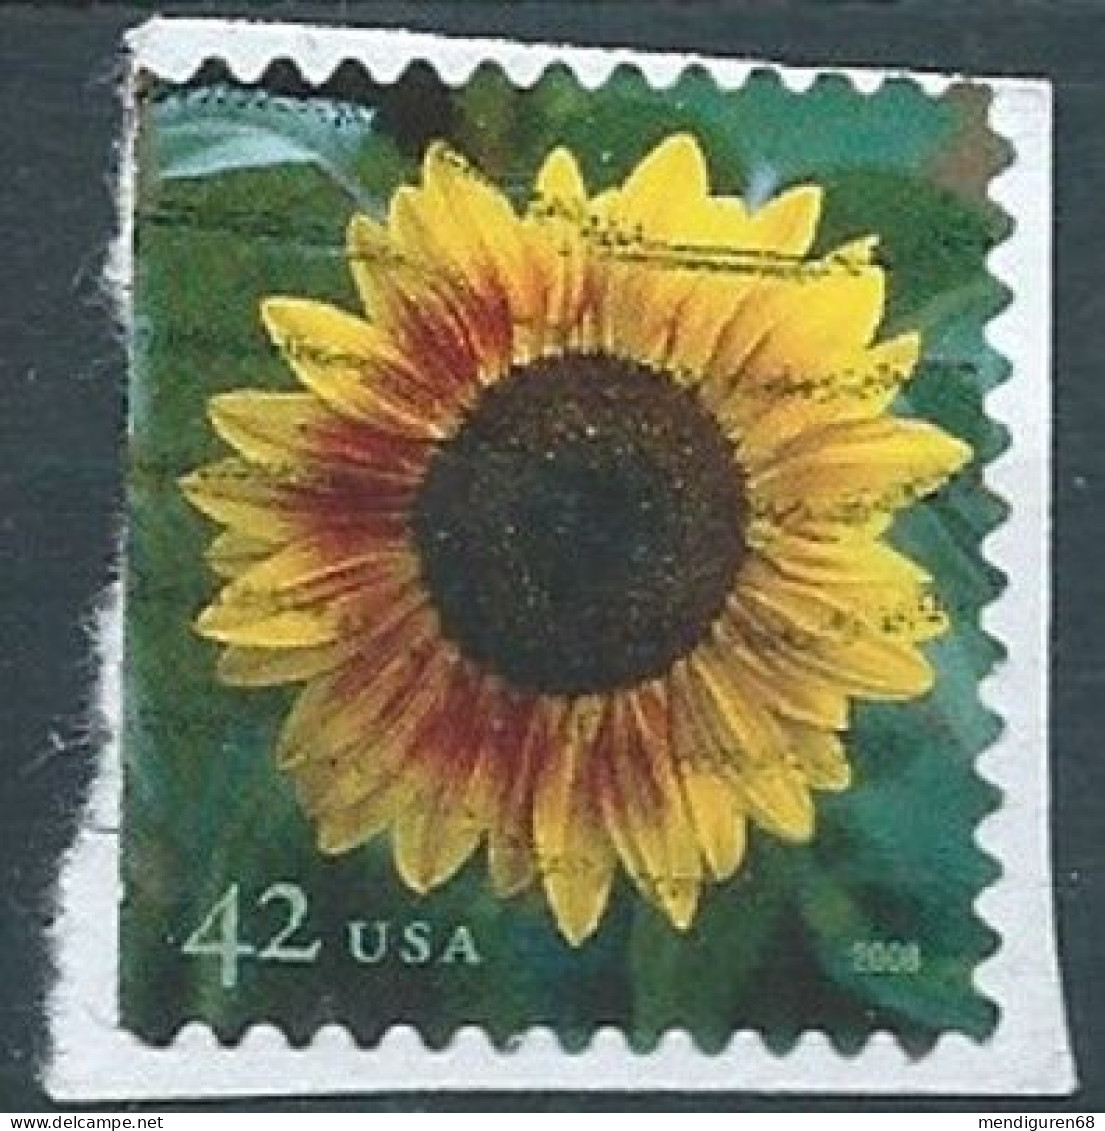 VERINIGTE STAATEN ETATS UNIS USA 2008 SUNFLOWER STAMP 42¢ USED ON PAPER SN 4347 YT 4092 MI 4422 SG 4887 - Used Stamps